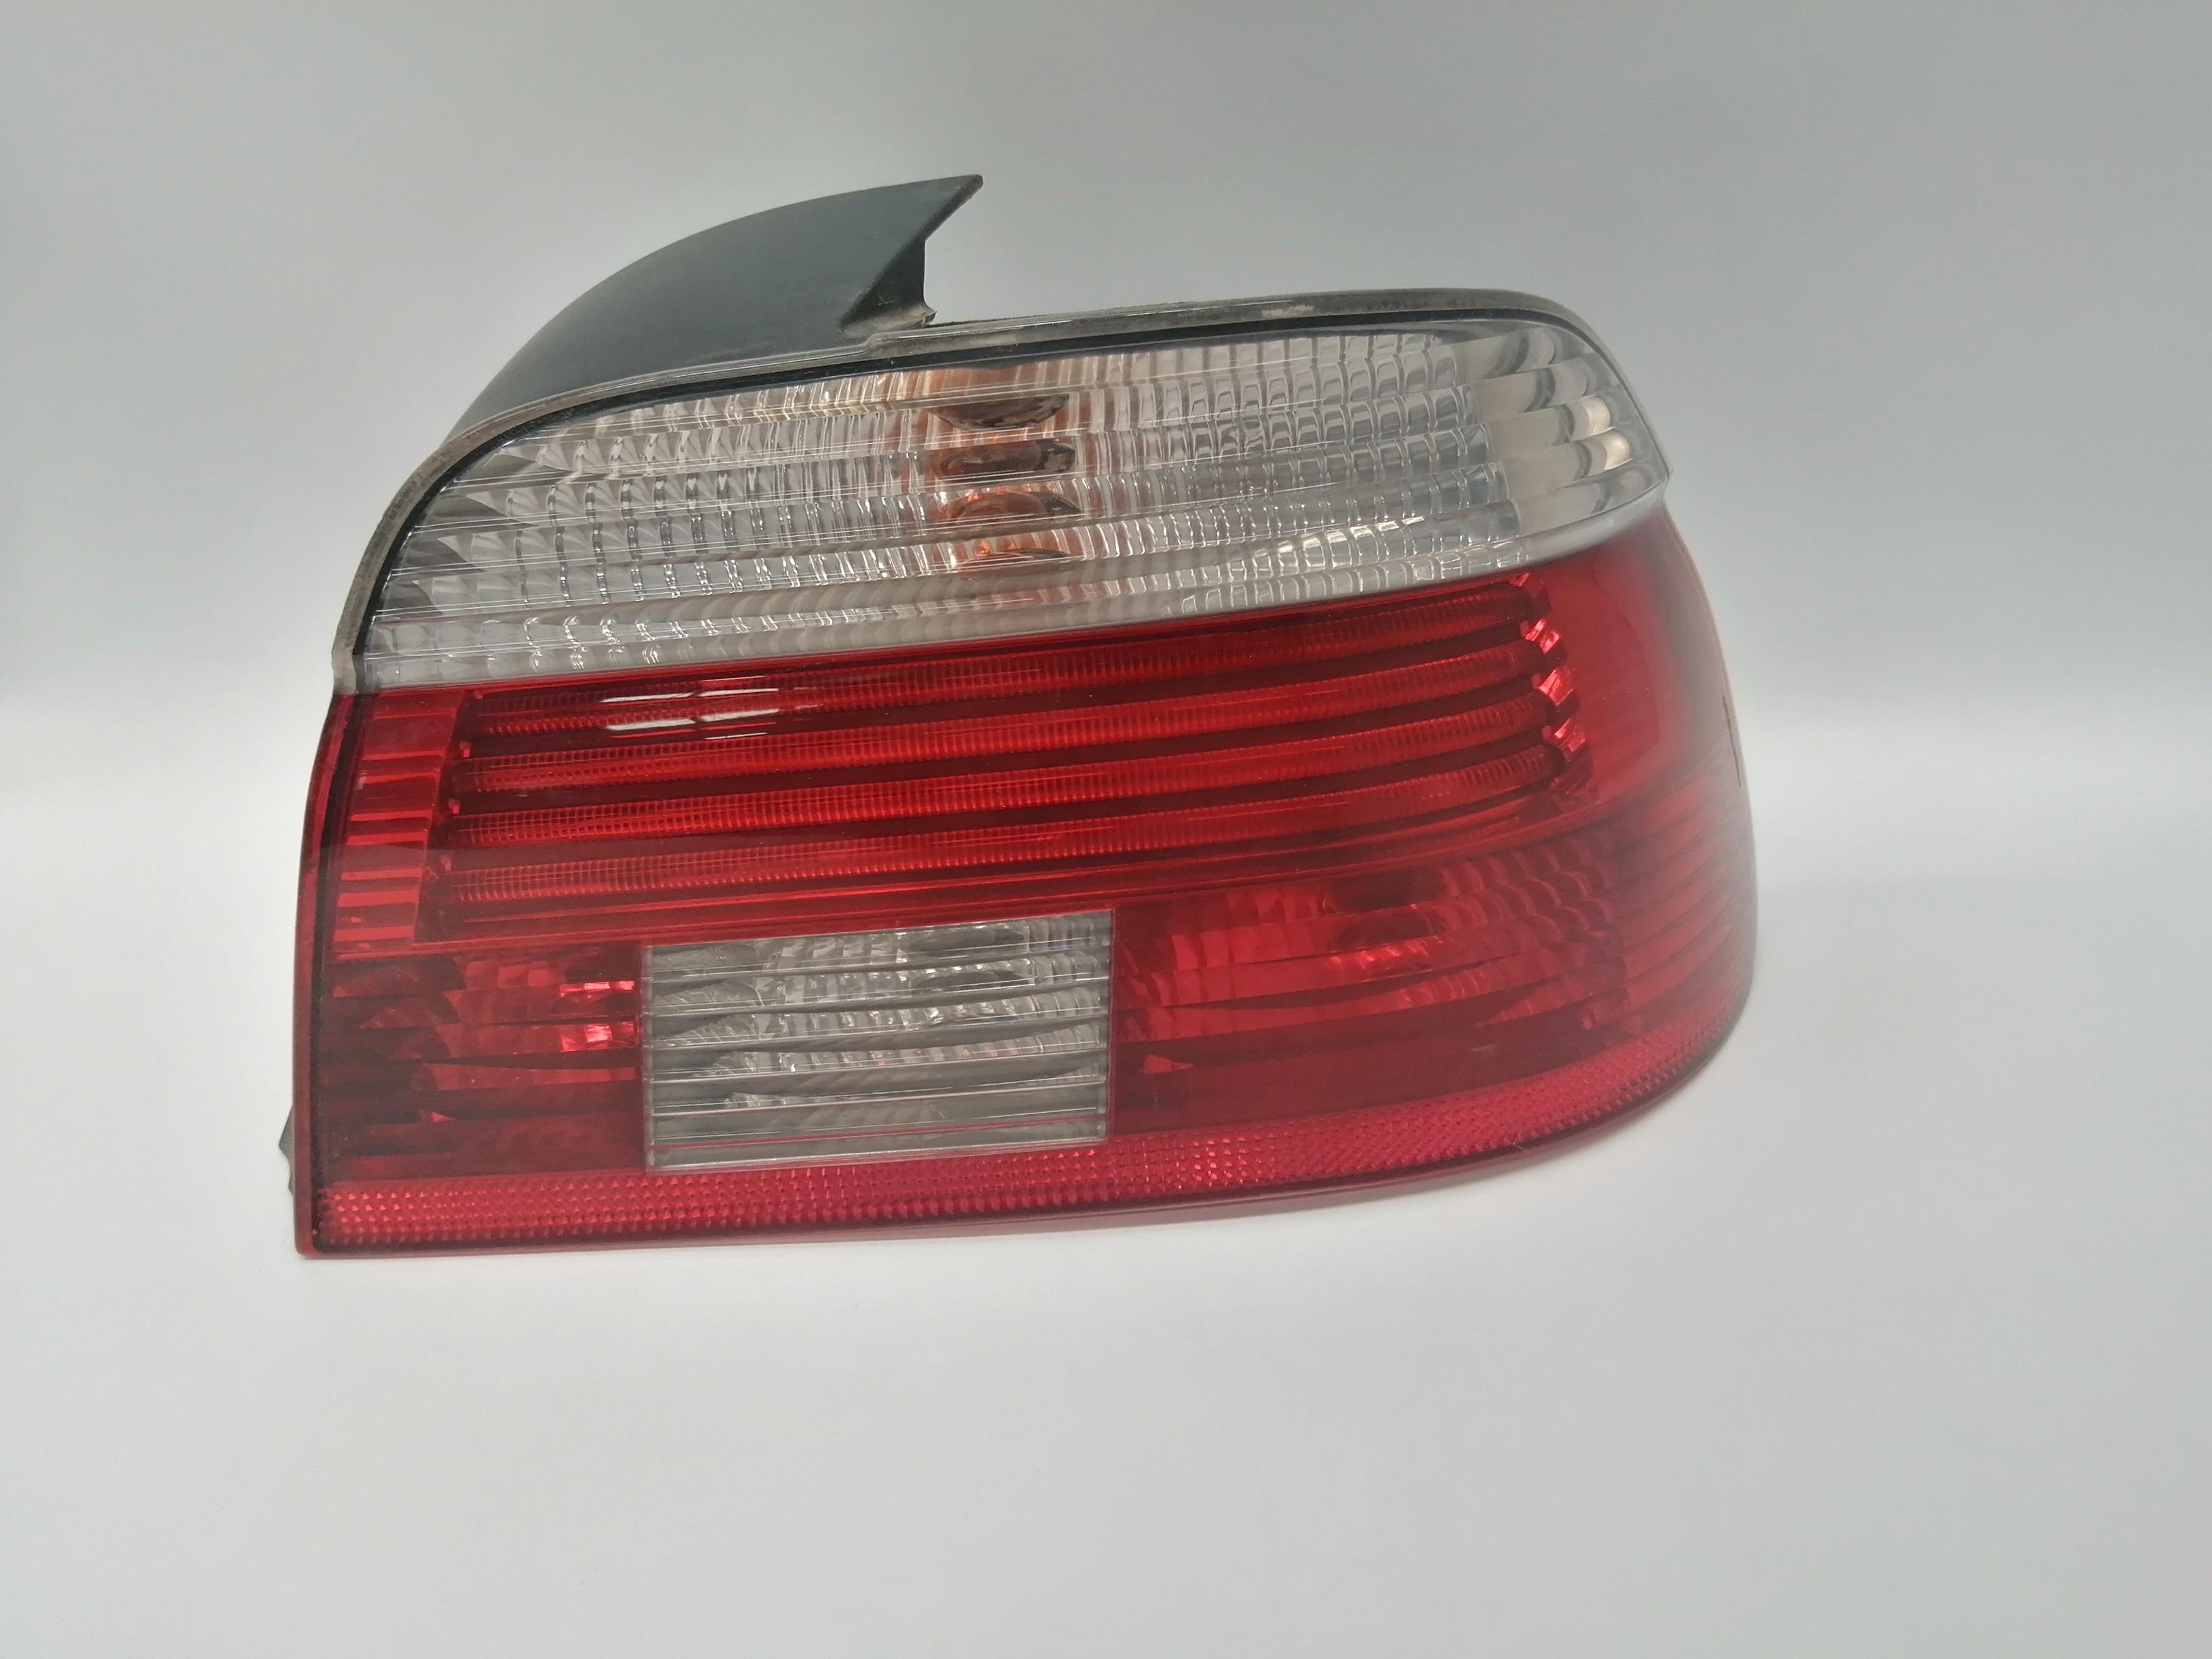 BMW 5 Series E39 (1995-2004) Rear Right Taillight Lamp 63216900210 25204722